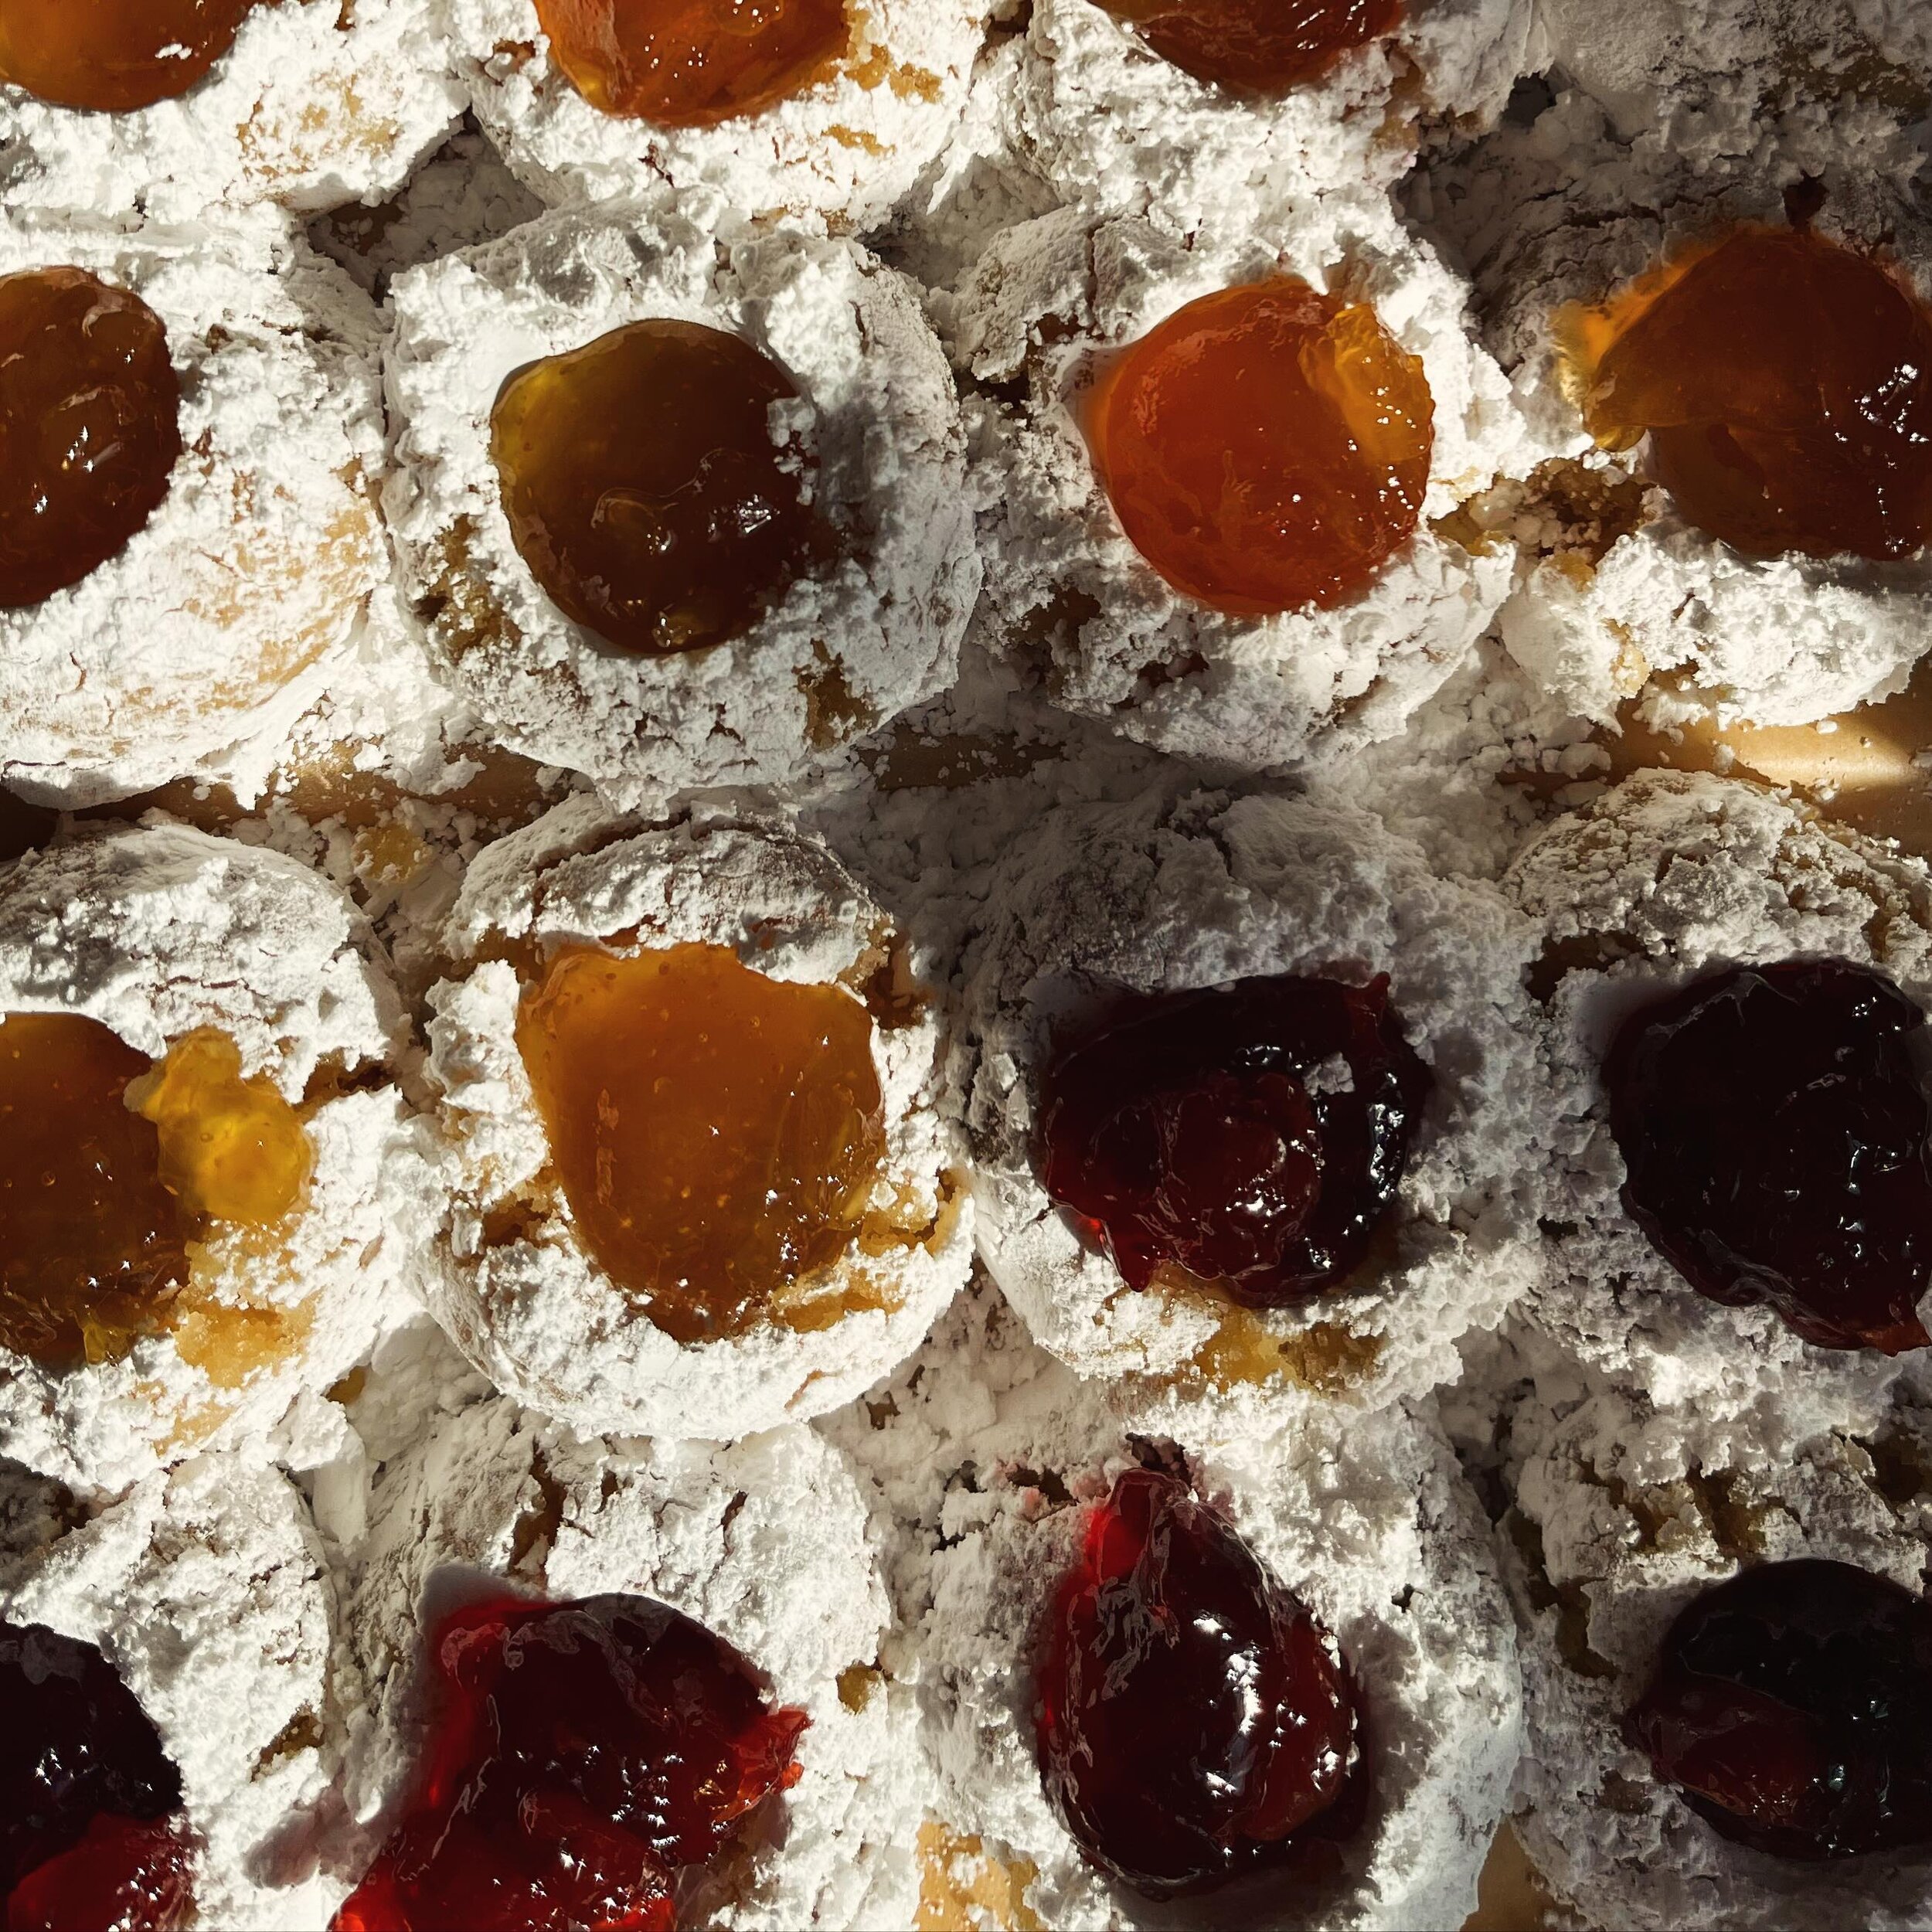 Fun mix of jams this week &mdash; cherry, fig, apricot, raspberry, and guava! Before their luxurious sauna experience (oven)&hellip;

#amaretti #Italiandesserts #italian #italia #dessertsofinstagram #dessert #bakery #commercialbakery #commercial #bak